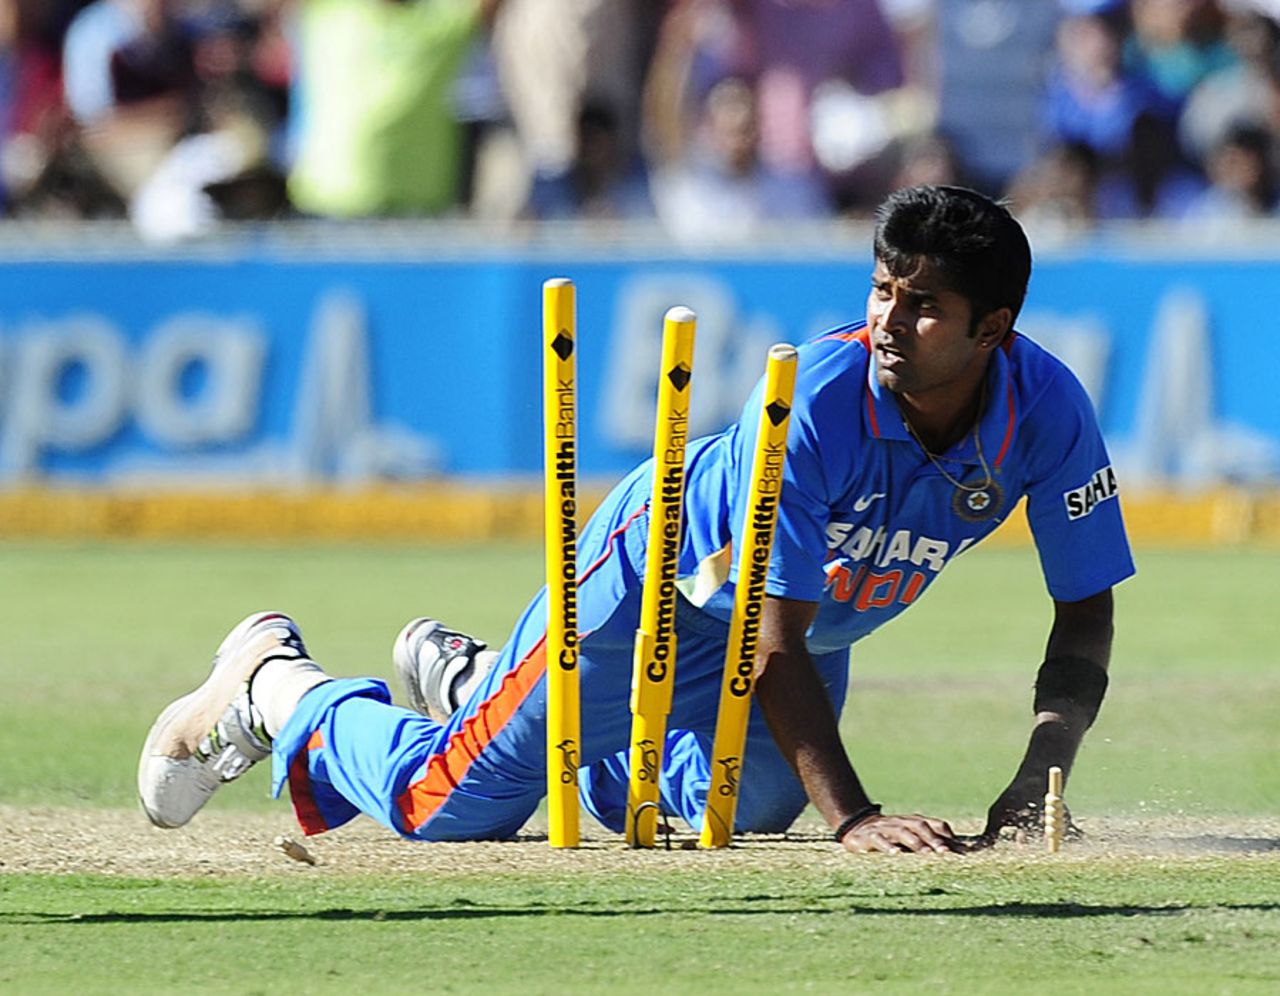 Vinay Kumar was involved in the run out of Clint McKay, Australia v India, Commonwealth Bank Series, Adelaide, February 12, 2012
